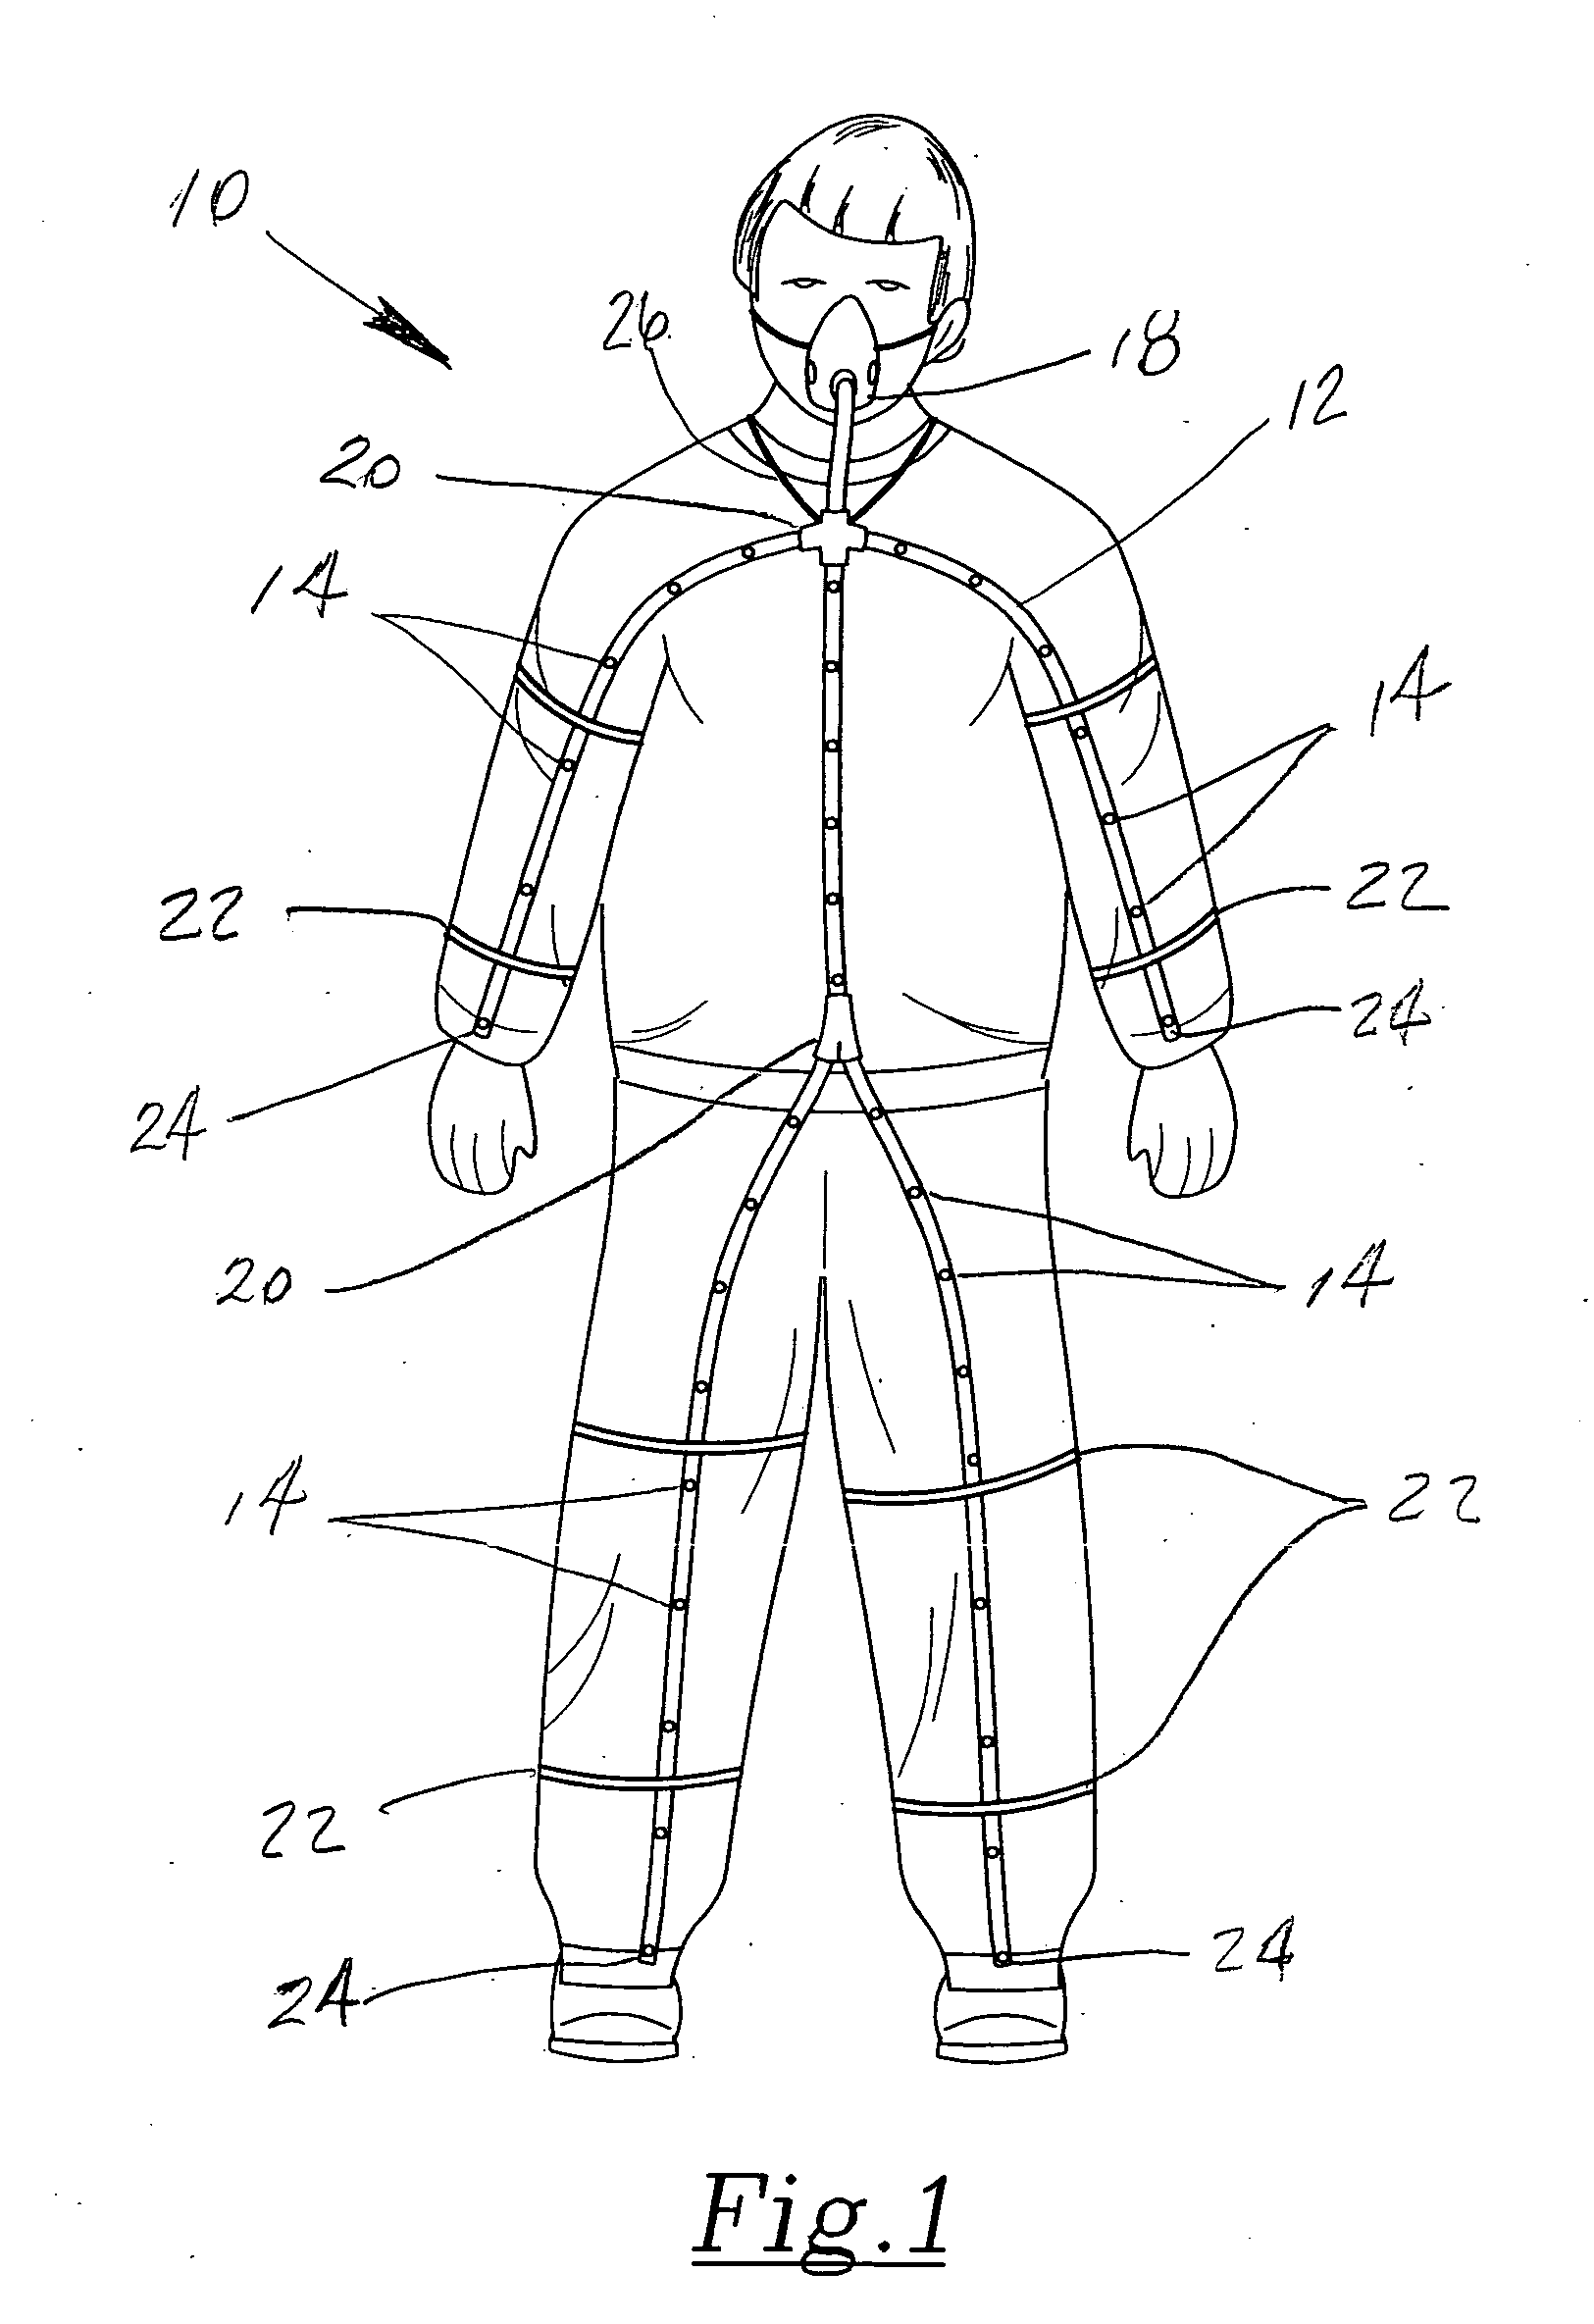 Recirculated self-heating air delivery system to warm the body